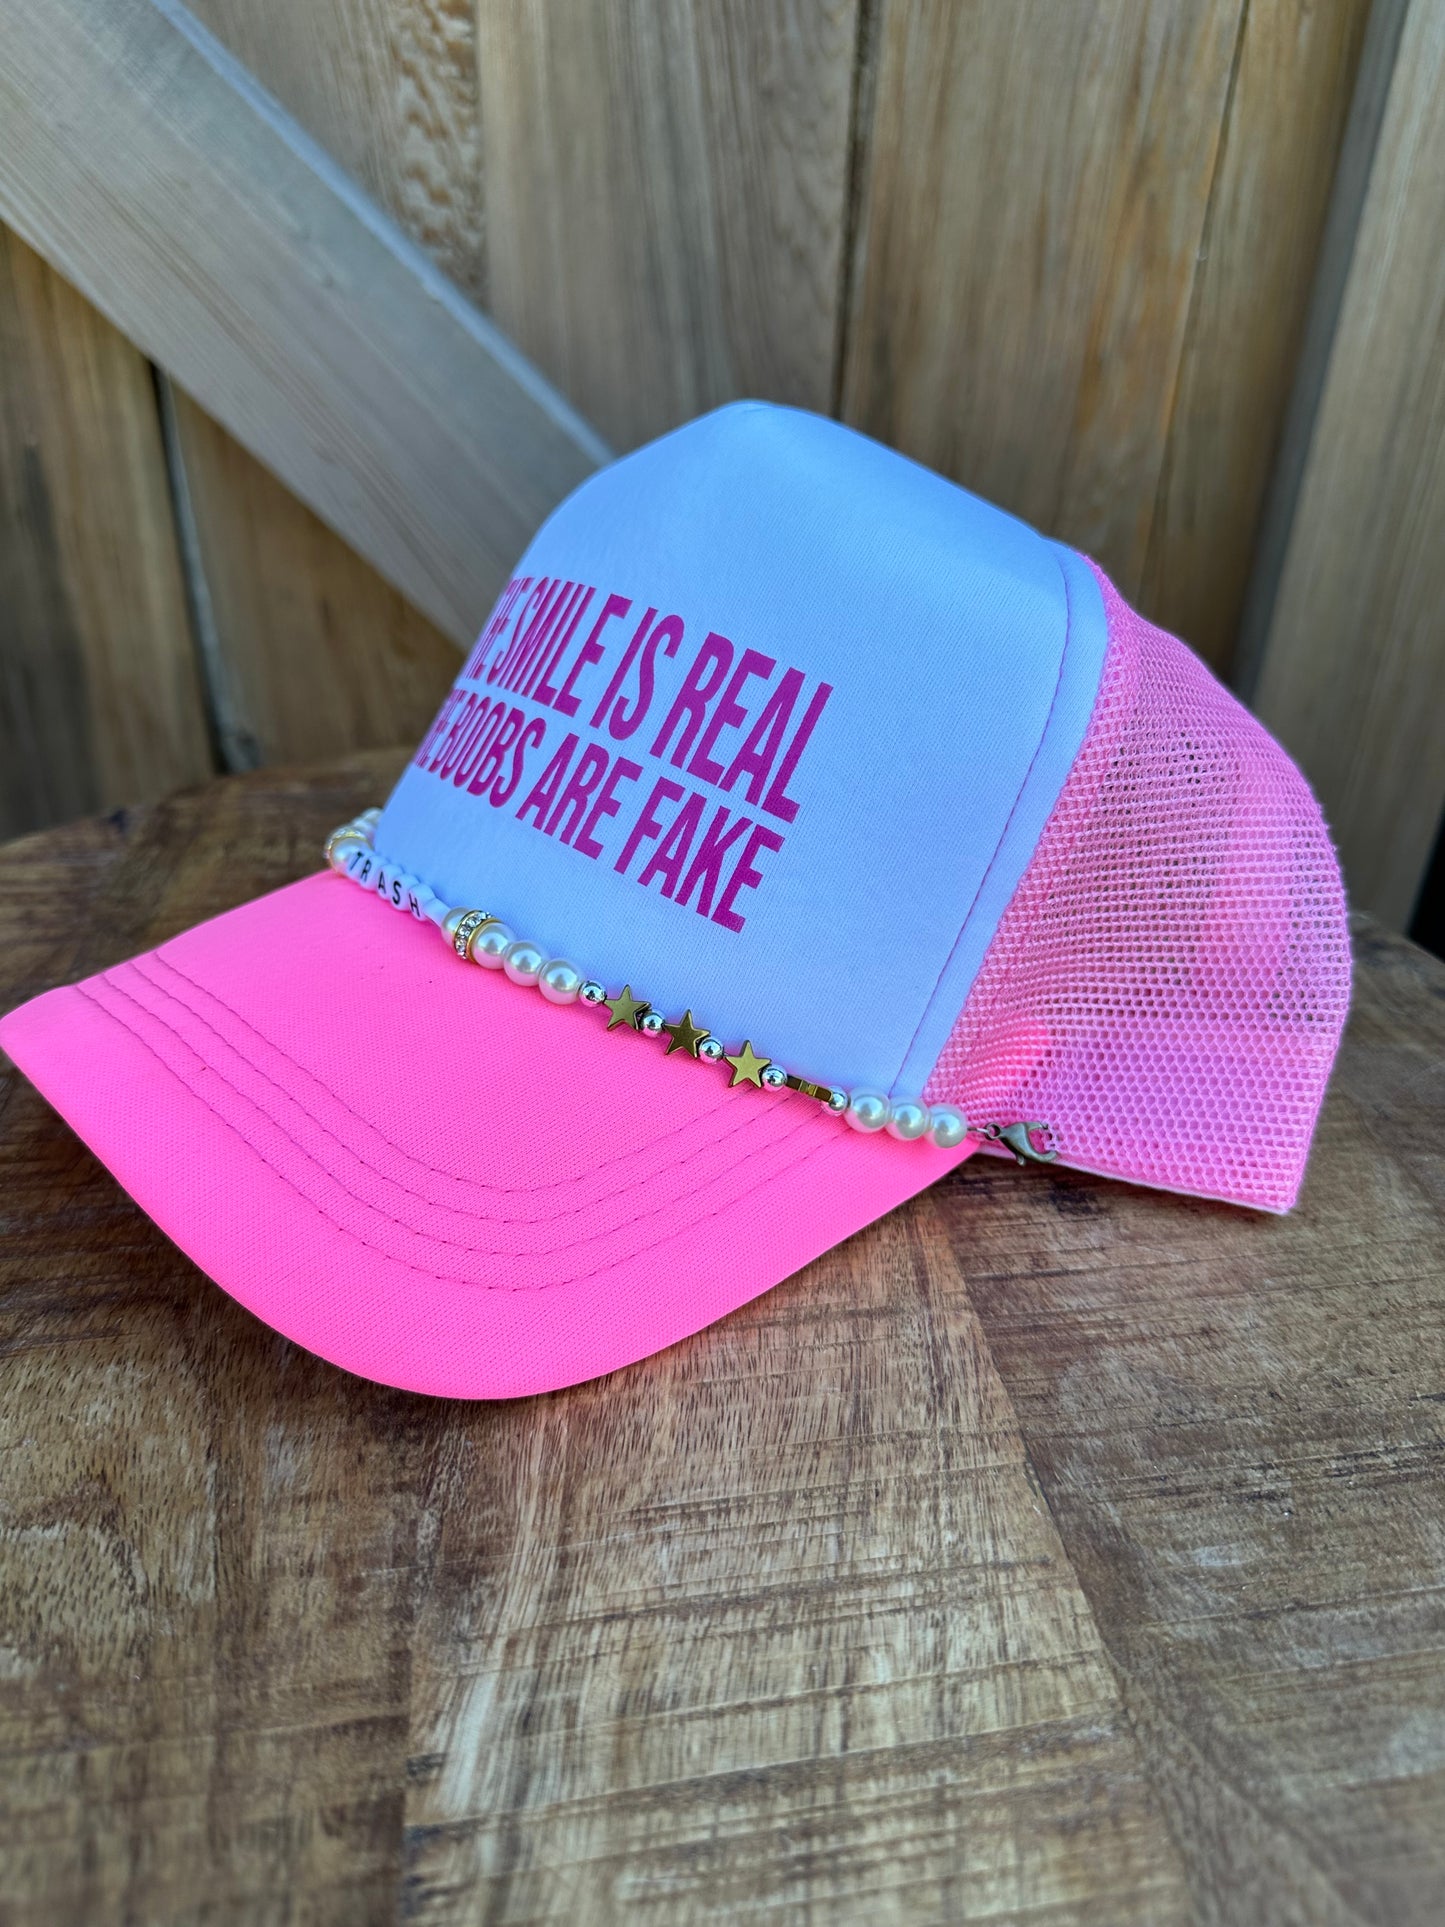 THE SMILE IS REAL TRUCKER HAT